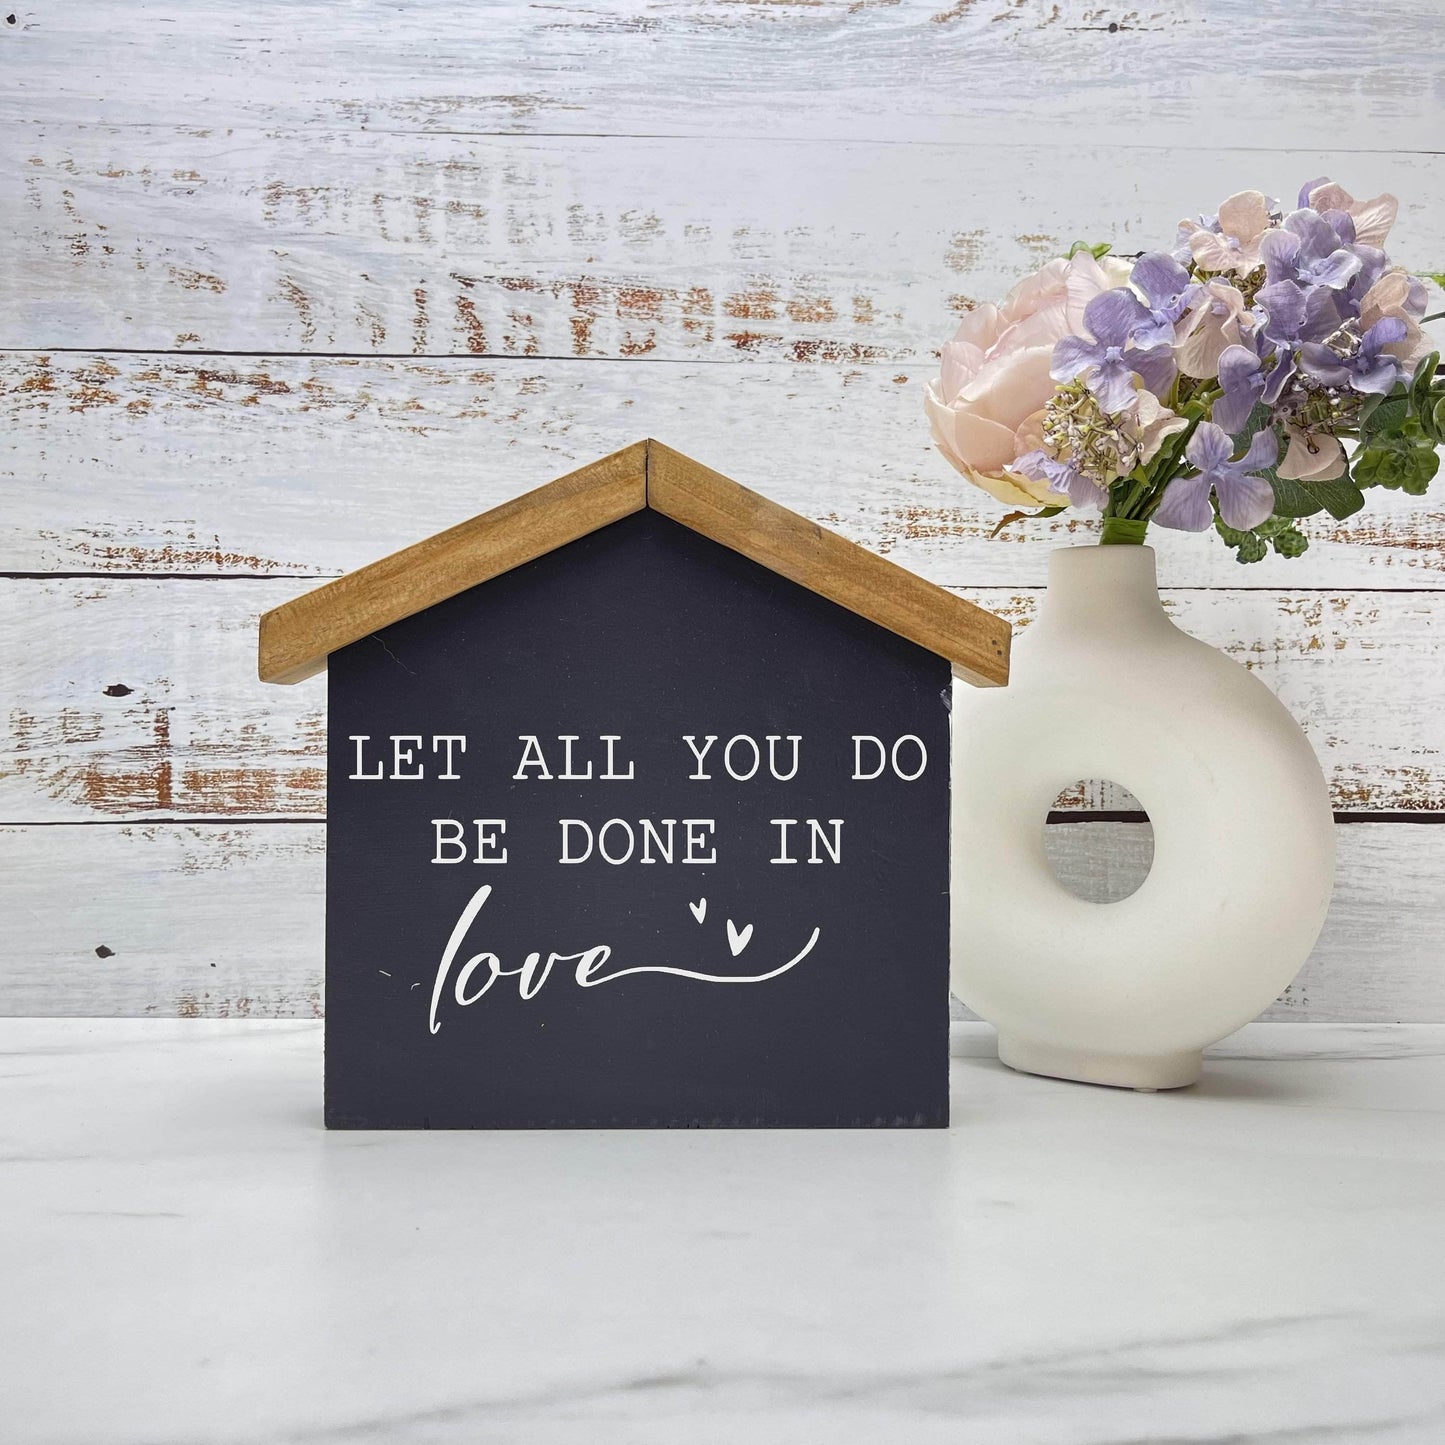 Let all you do be in love House wood sign, farmhouse sign, rustic decor, home decor